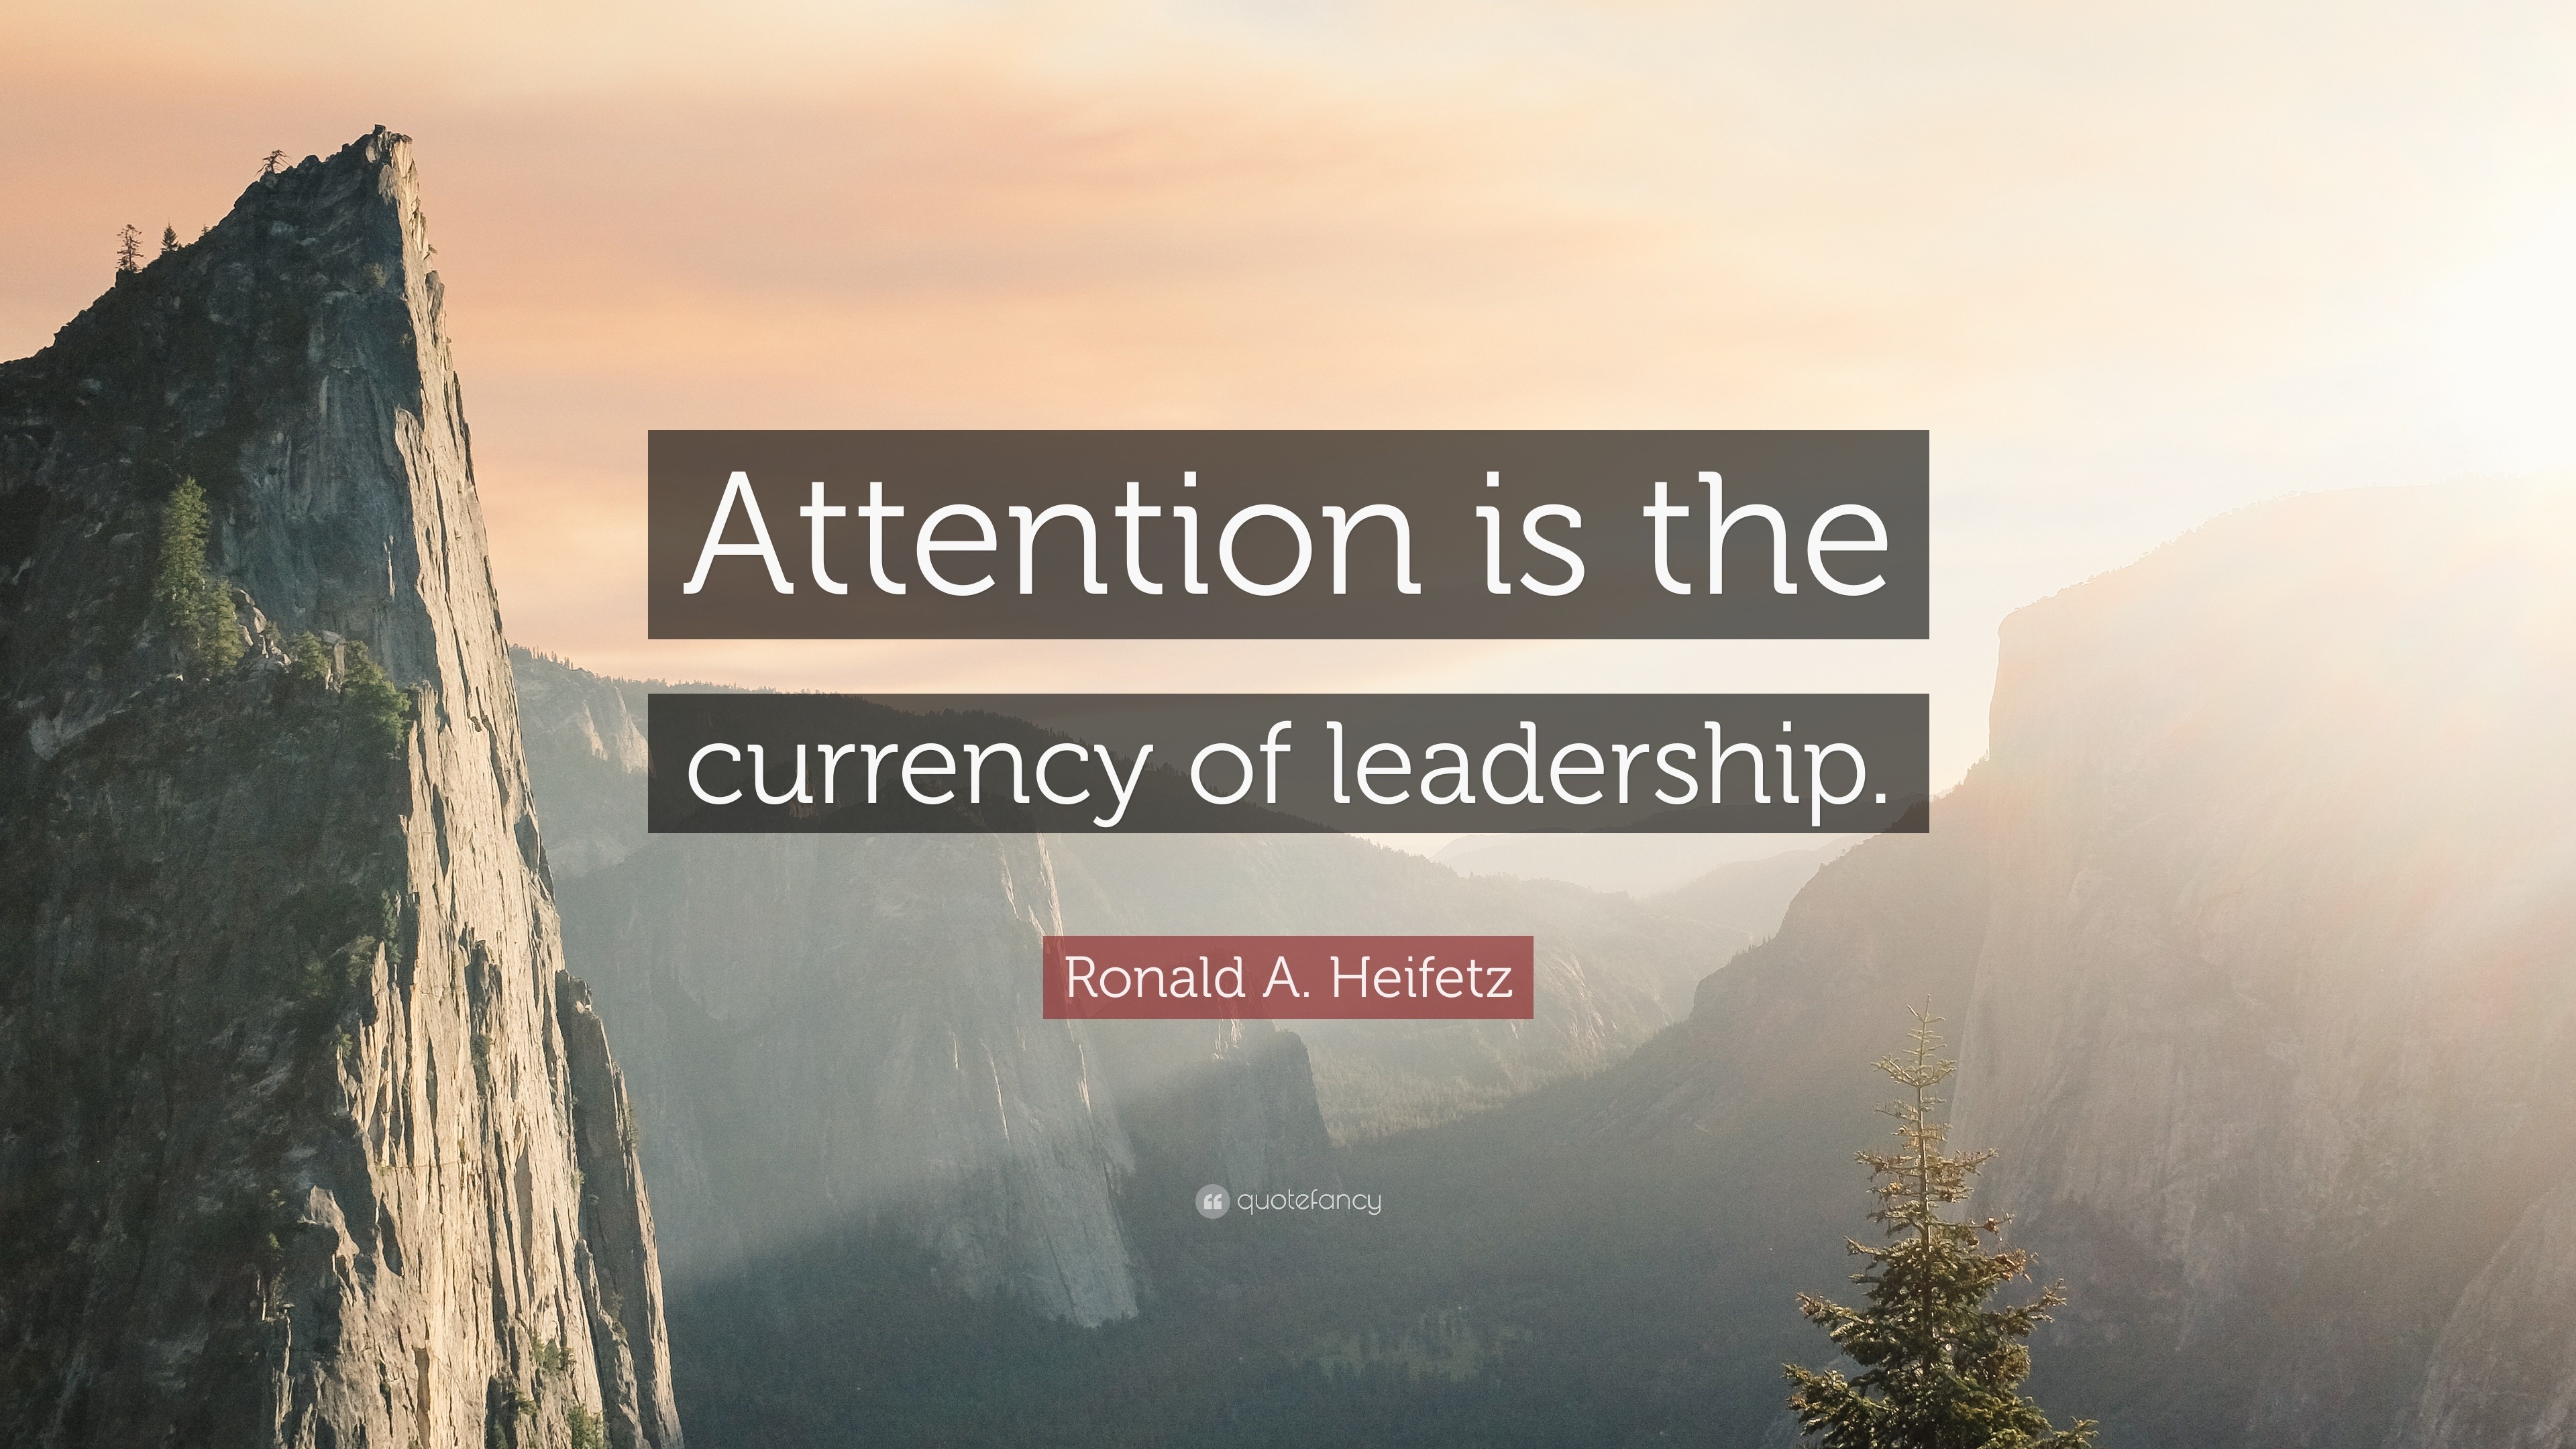 Ronald A. Heifetz Quote: “Attention is the currency of leadership.”